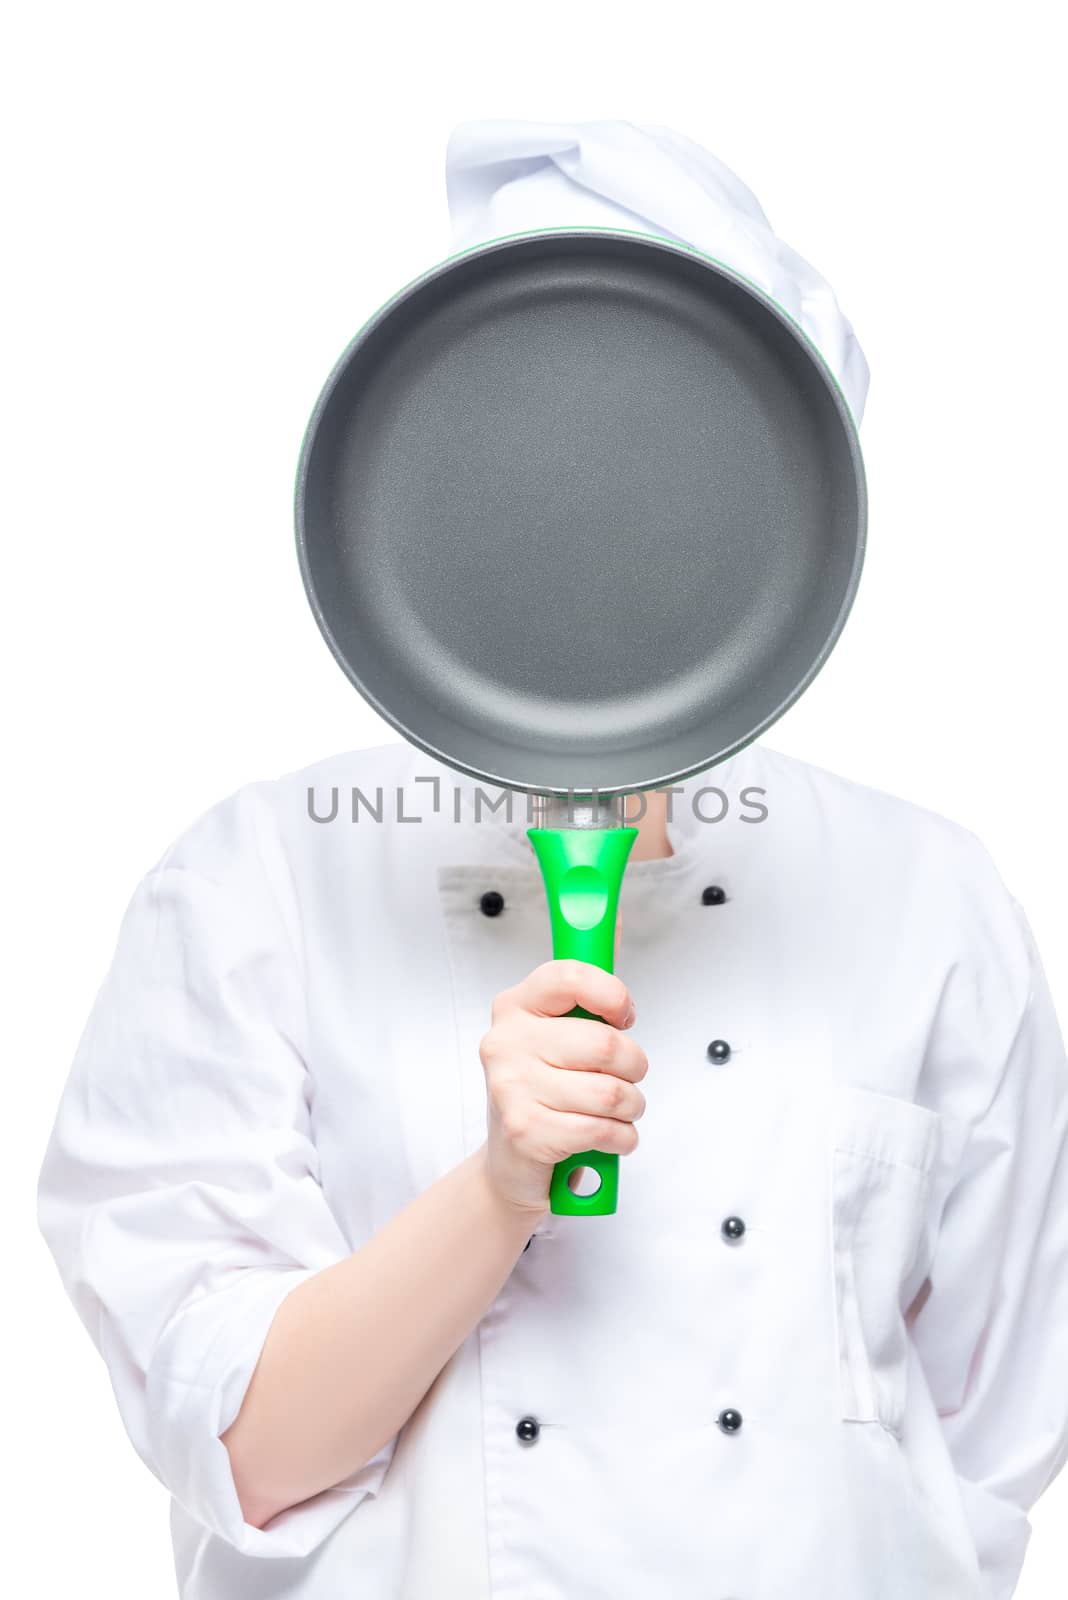 cook covers his face with a frying pan, studio shot on white bac by kosmsos111